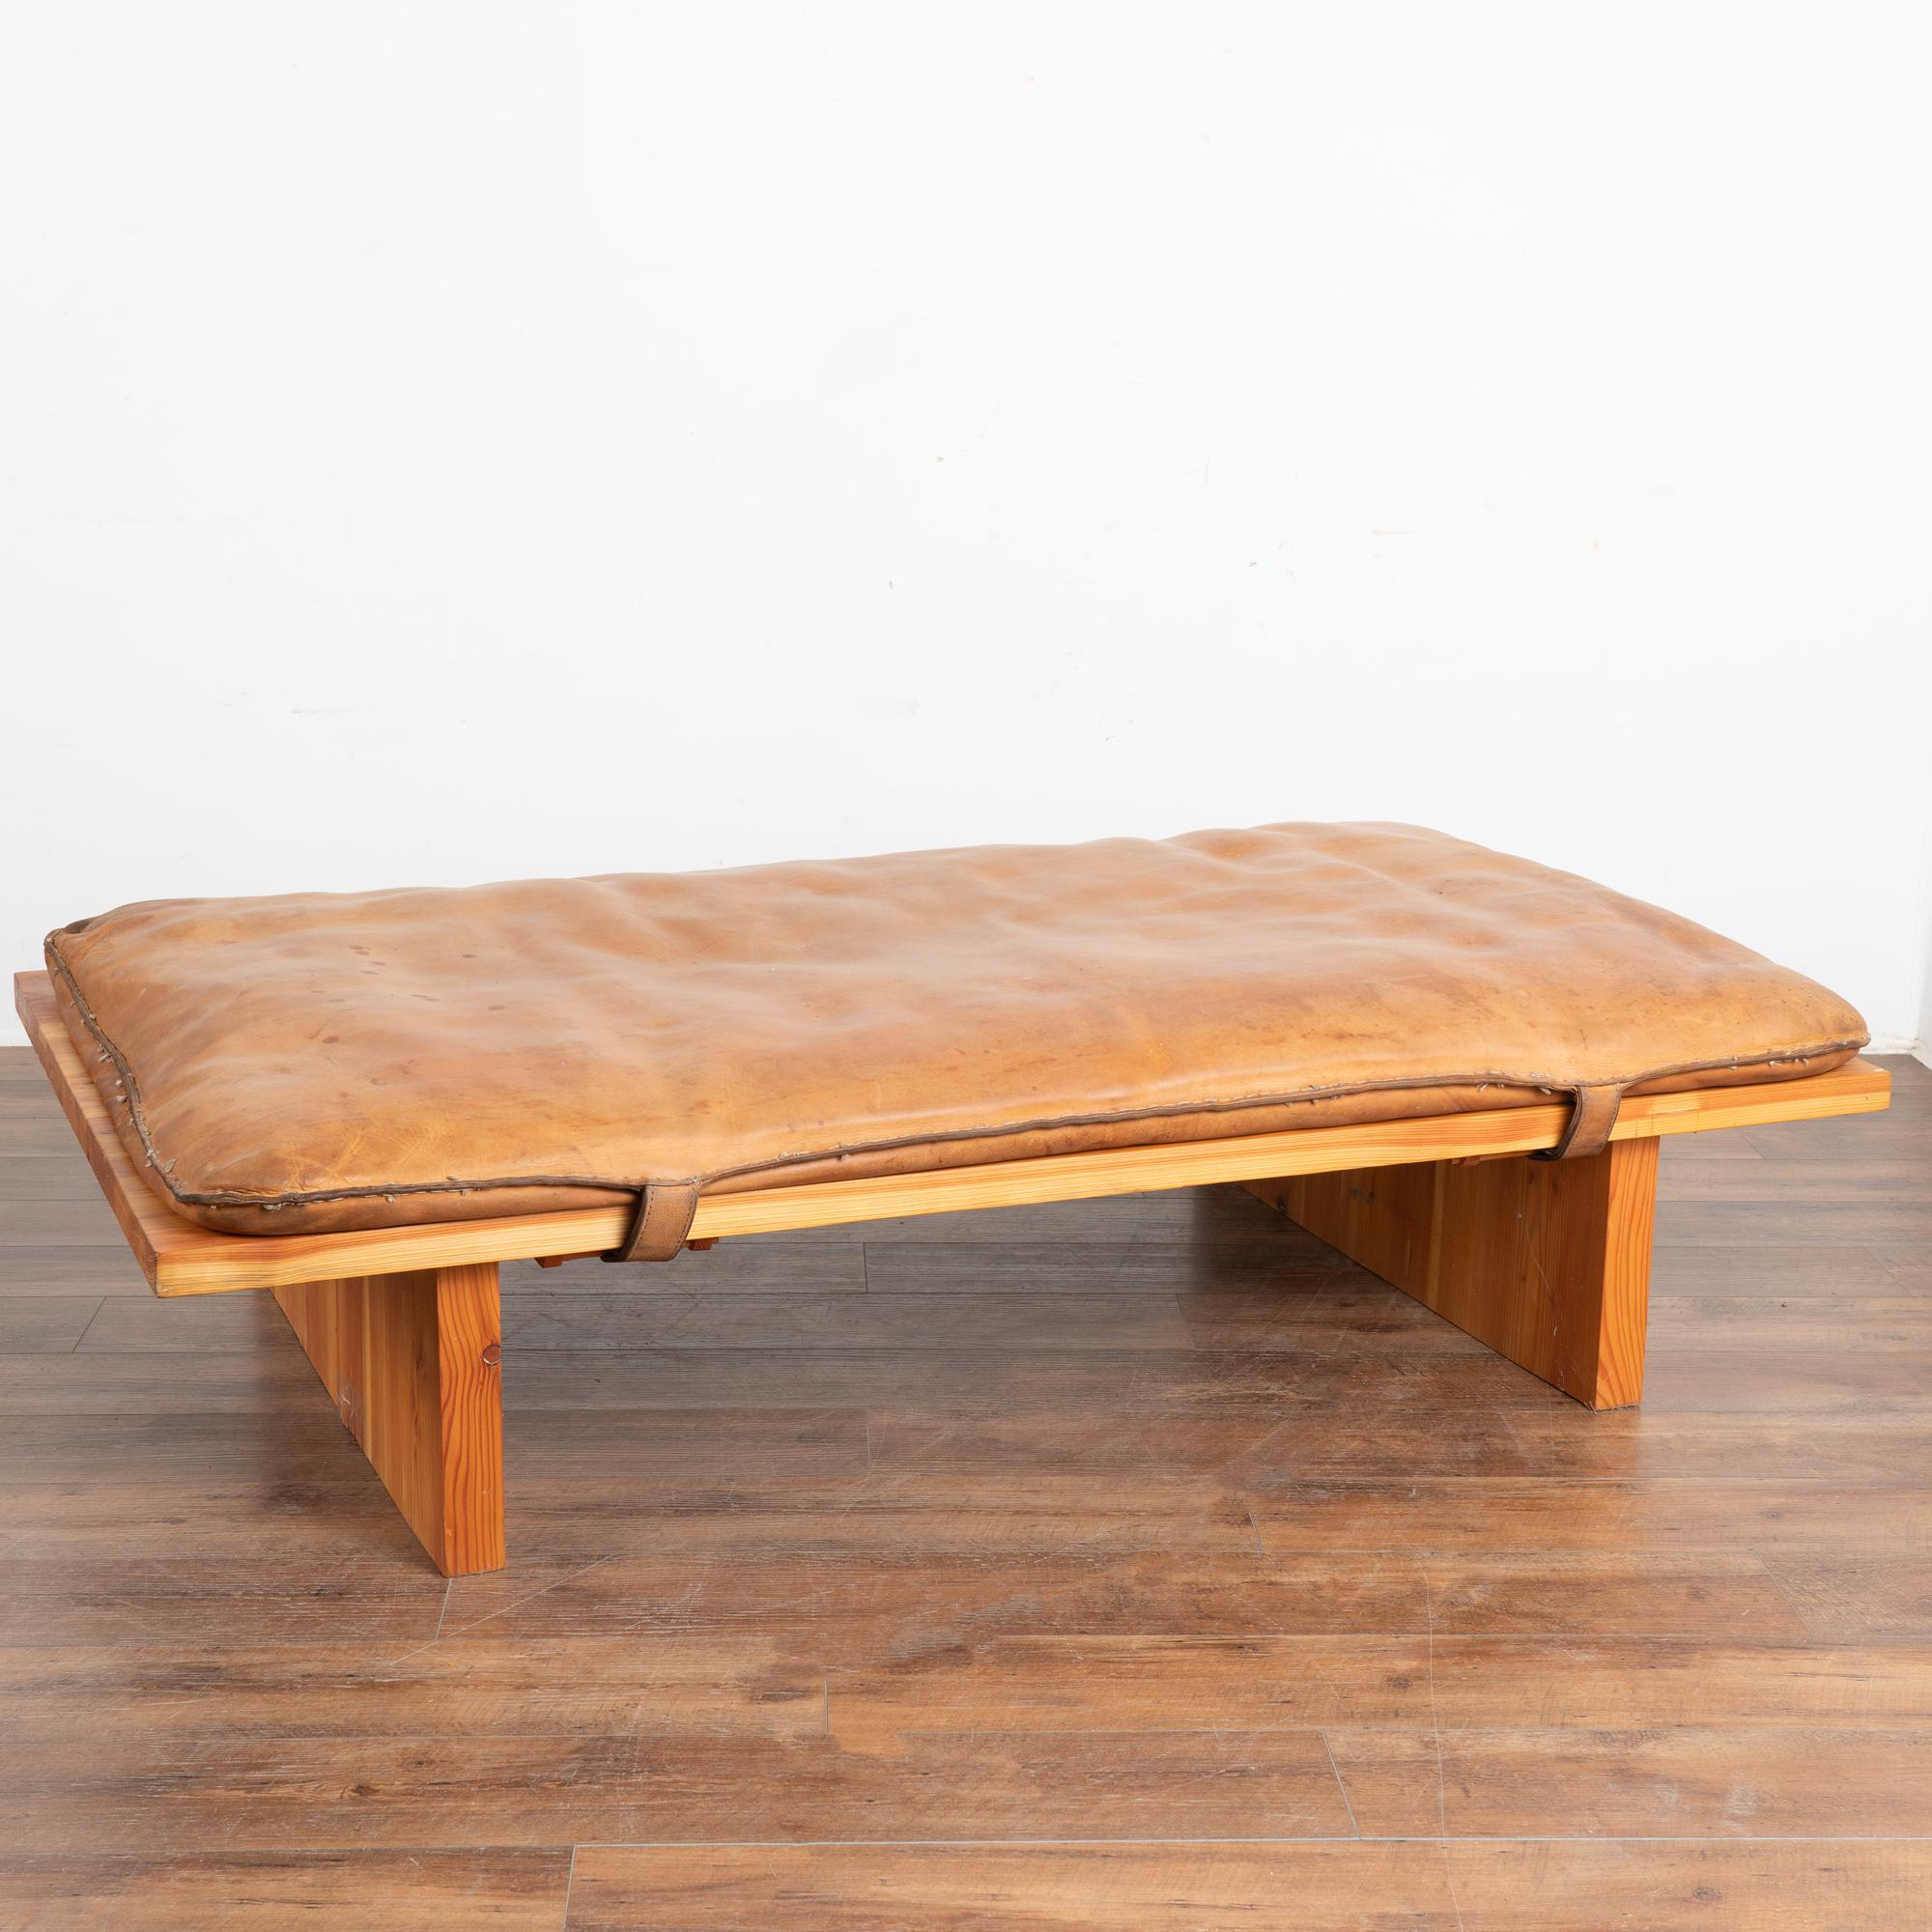 The vintage leather of this old gym mat is loaded with character and patina and rests on a wood base, creating an oversized ottoman or coffee table for today's modern home. 
The leather reveals stains, scuffs/scratches from years of use, and will